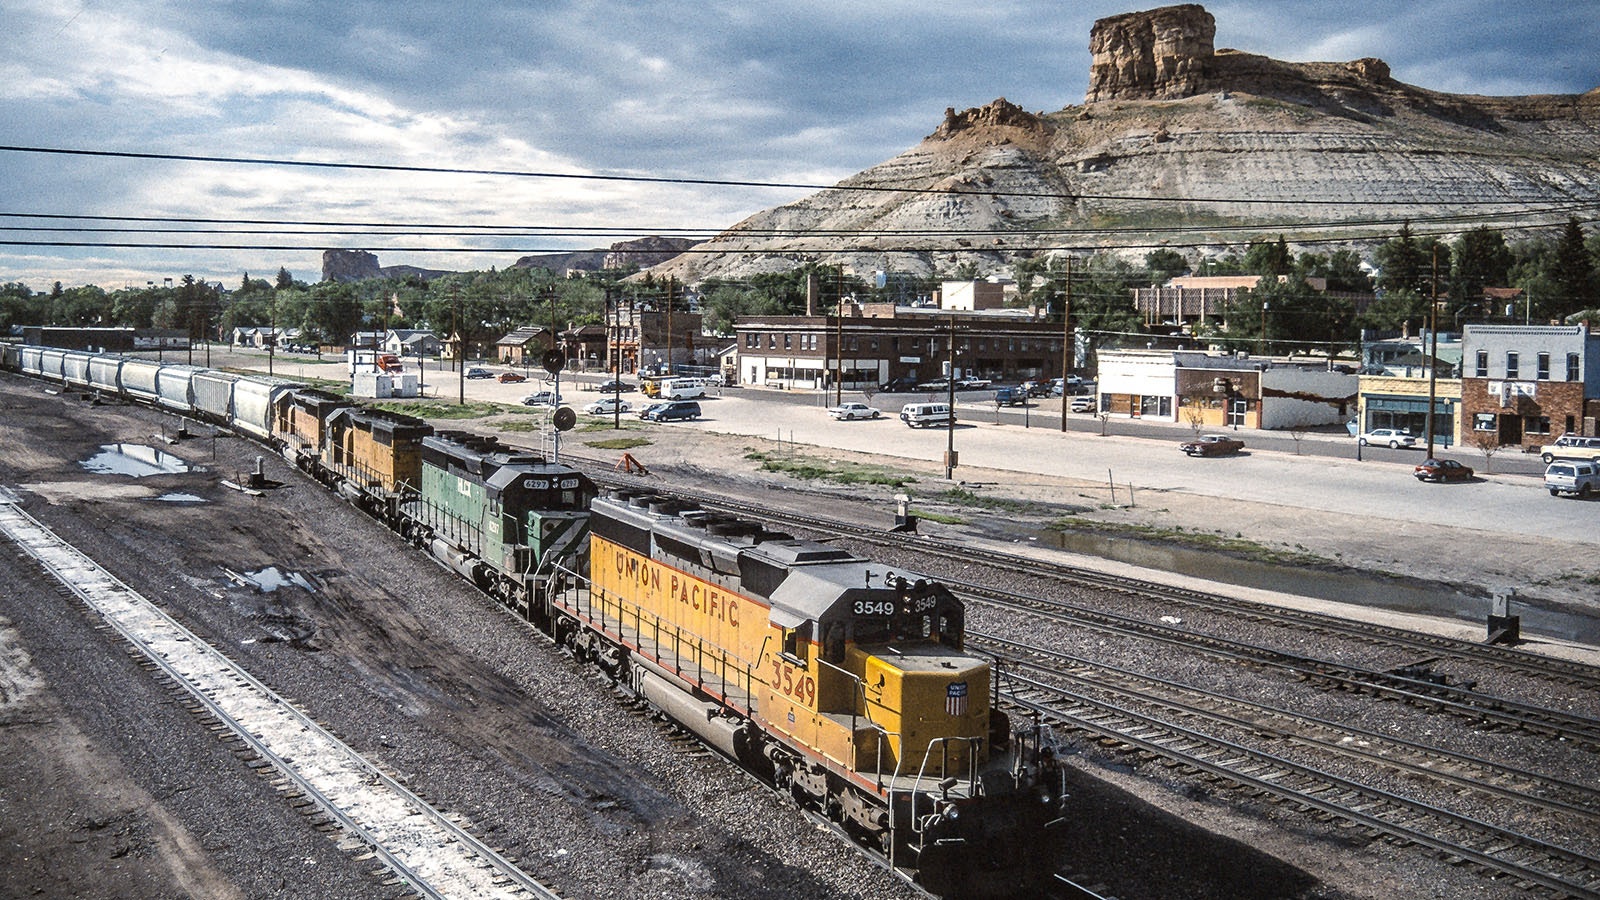 Green River, Wyoming, has been an important Wyoming rail hub for more than 150 years.